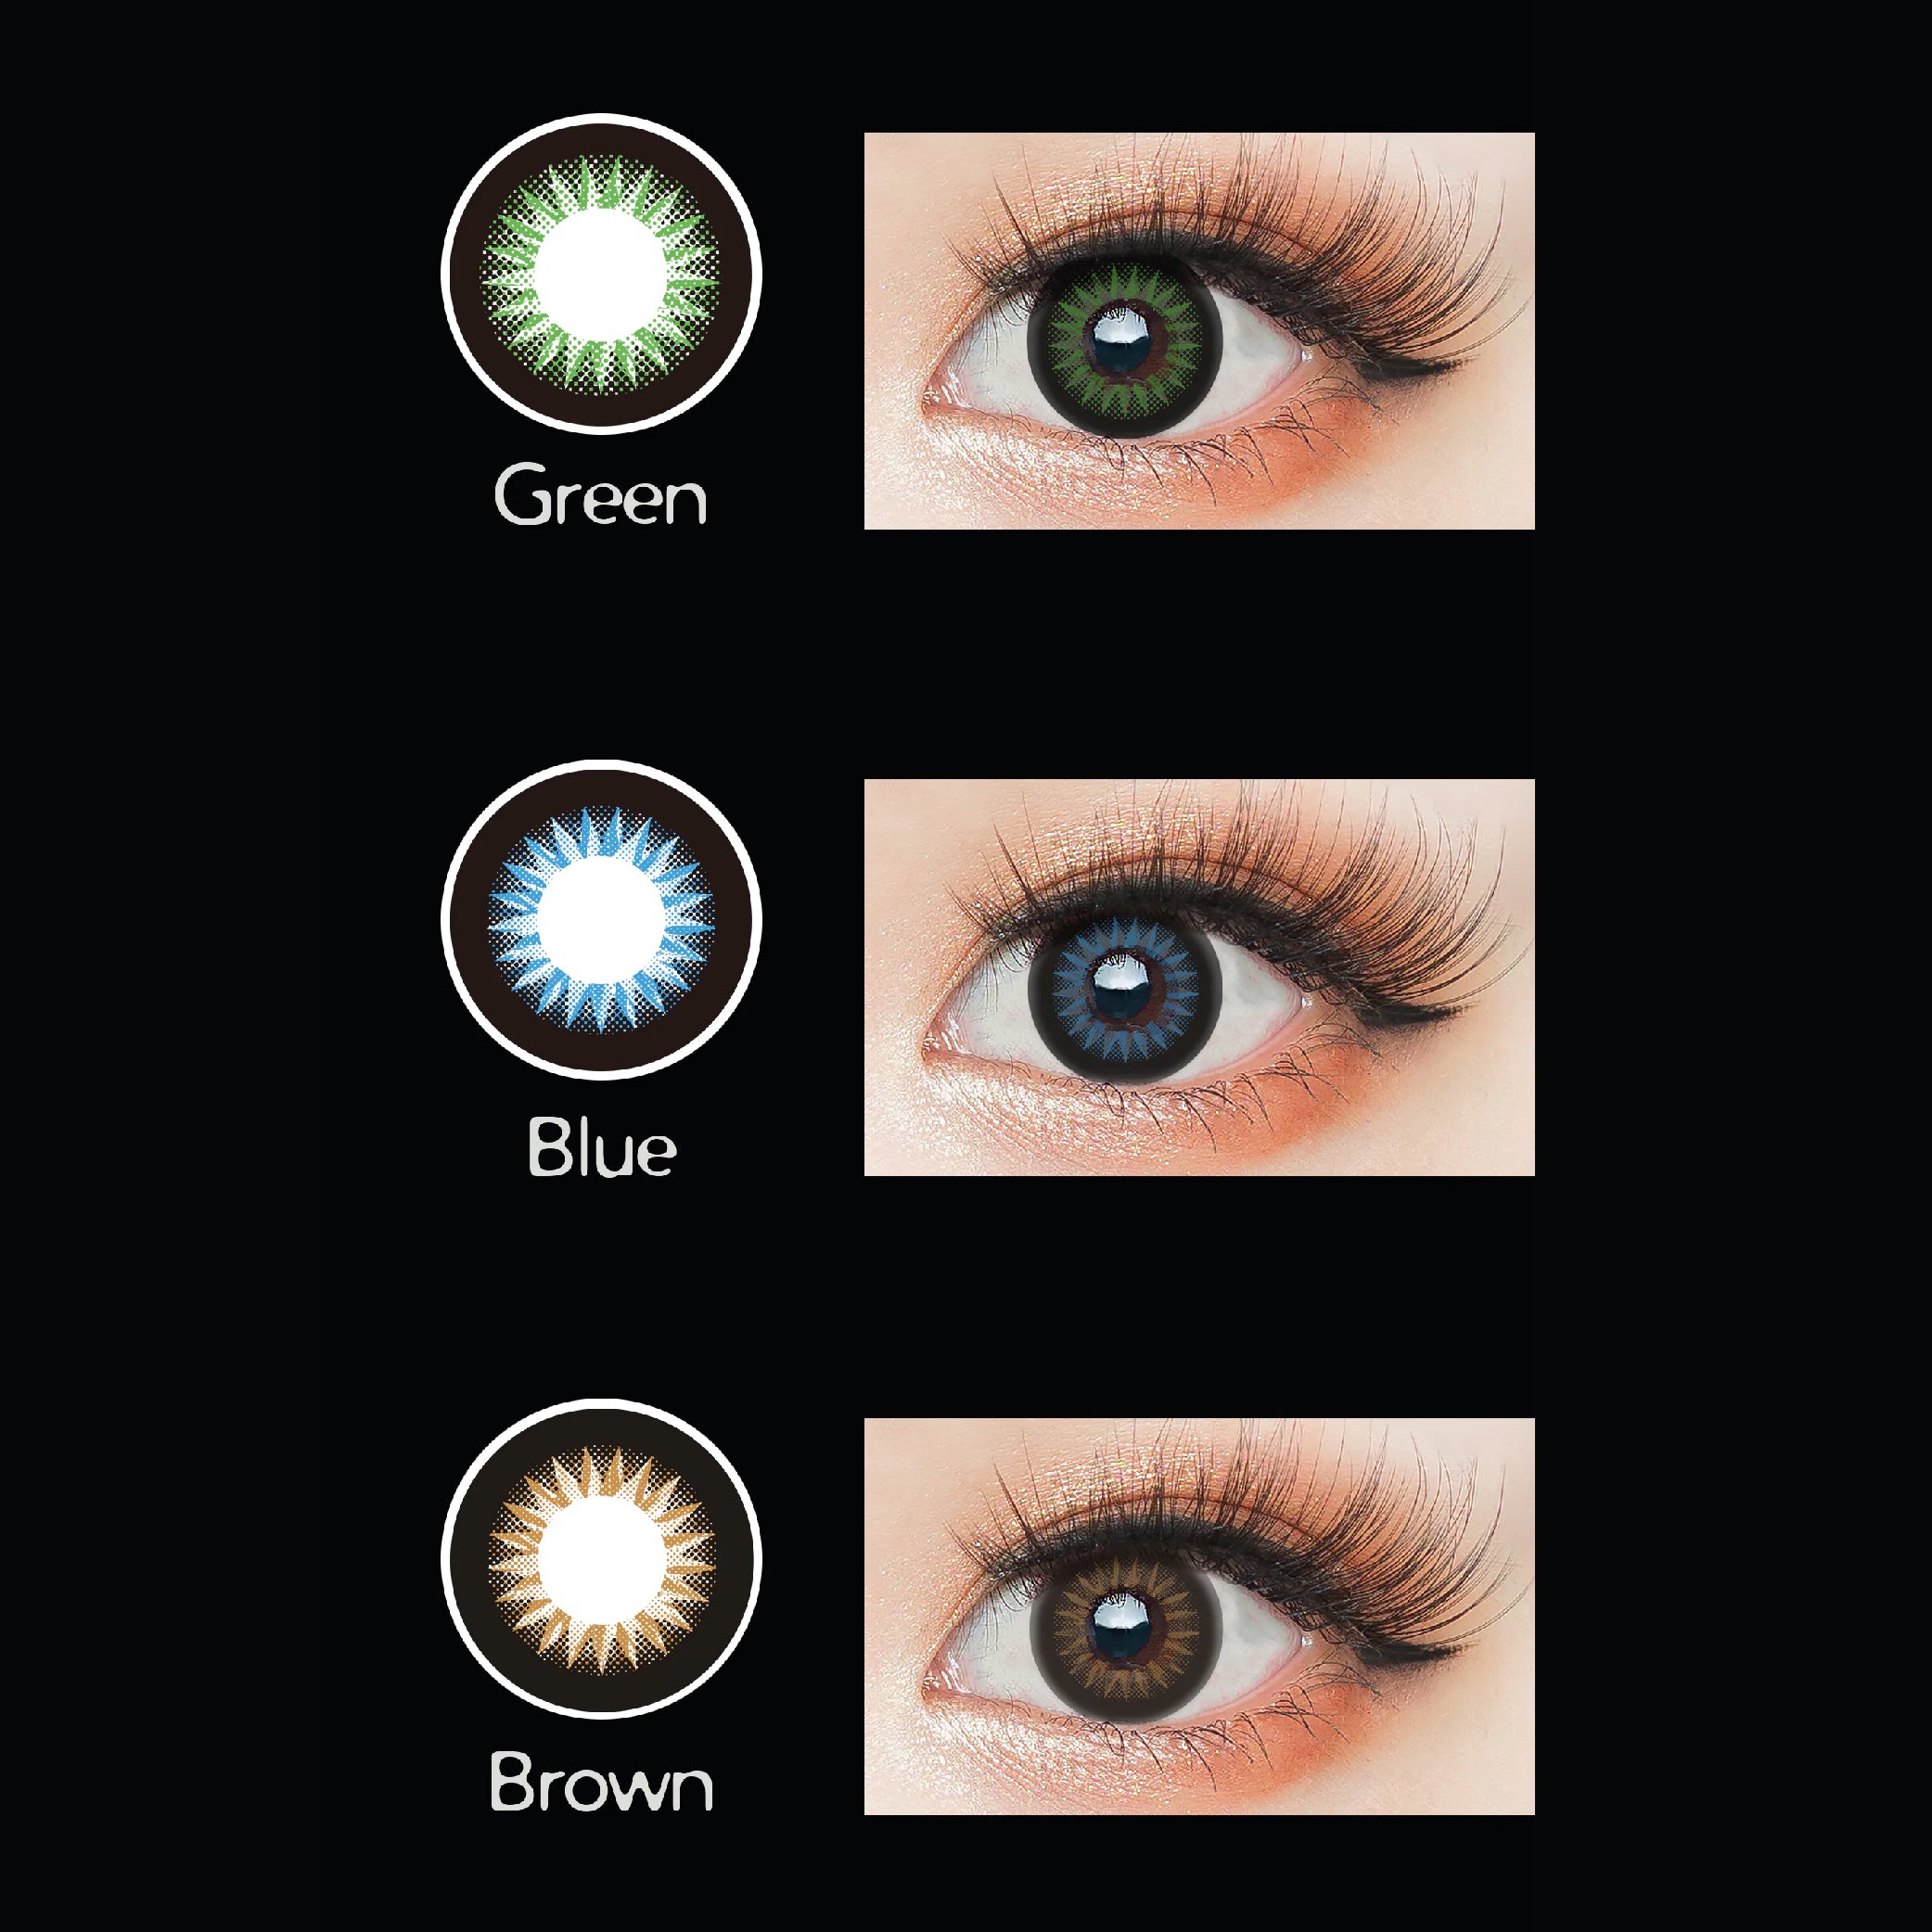 Maxi Eyes Magic Colors Monthly Yellow Series